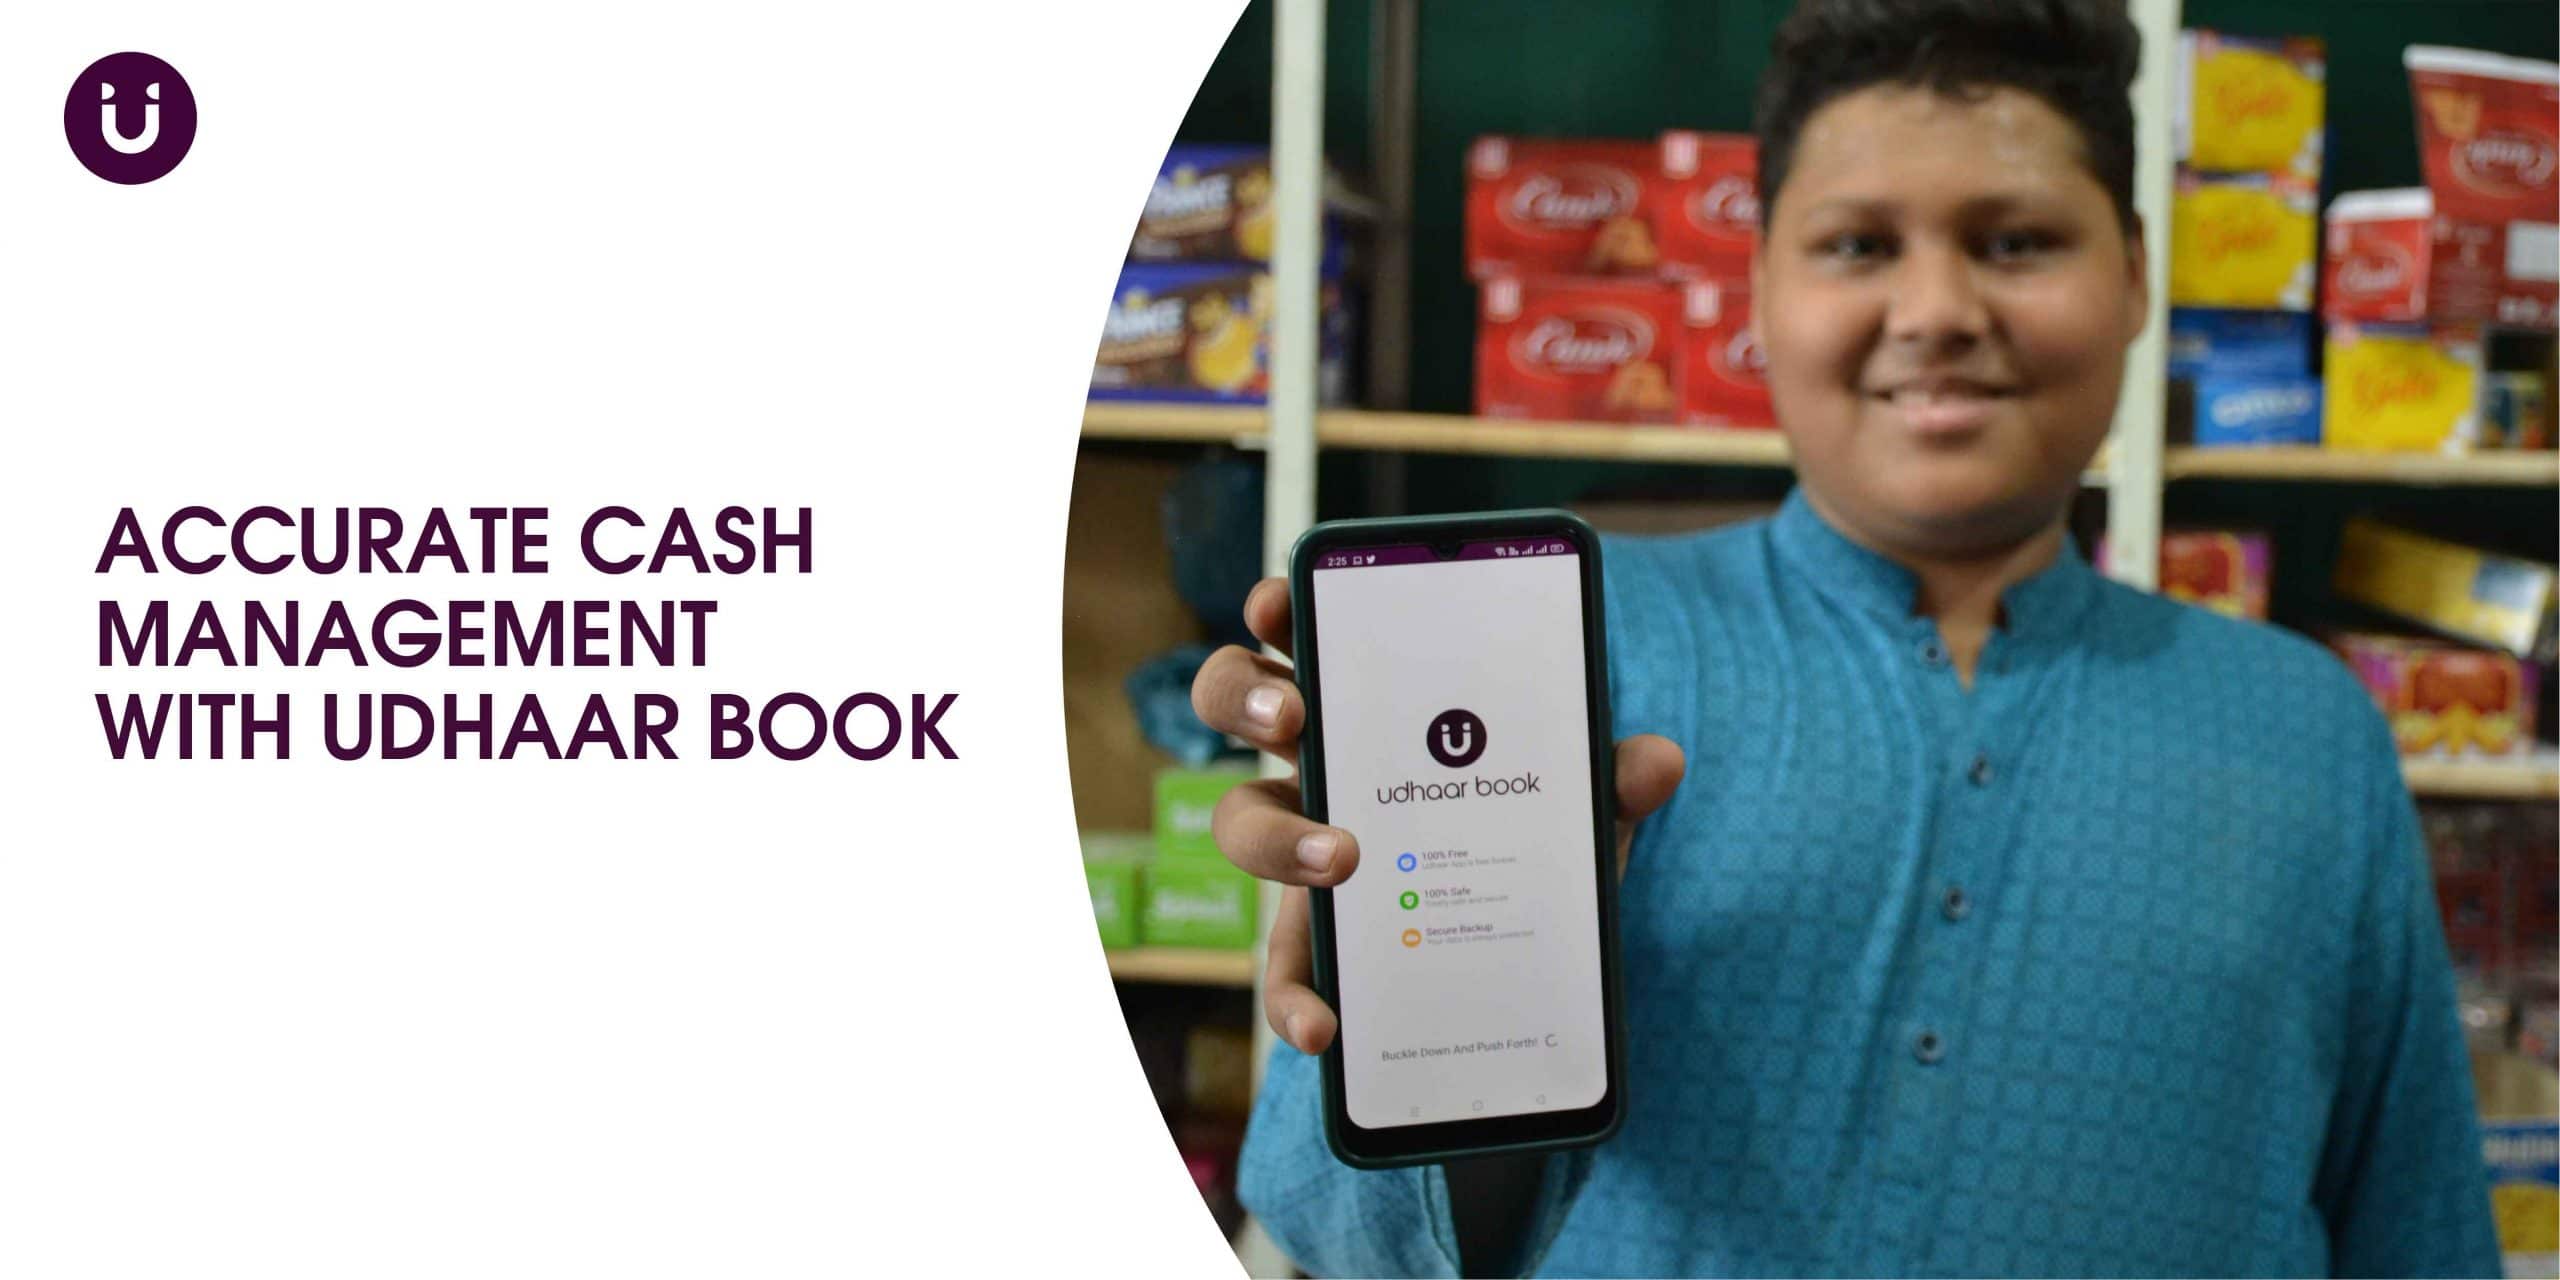 Accurate Cash Management with Udhaar Book